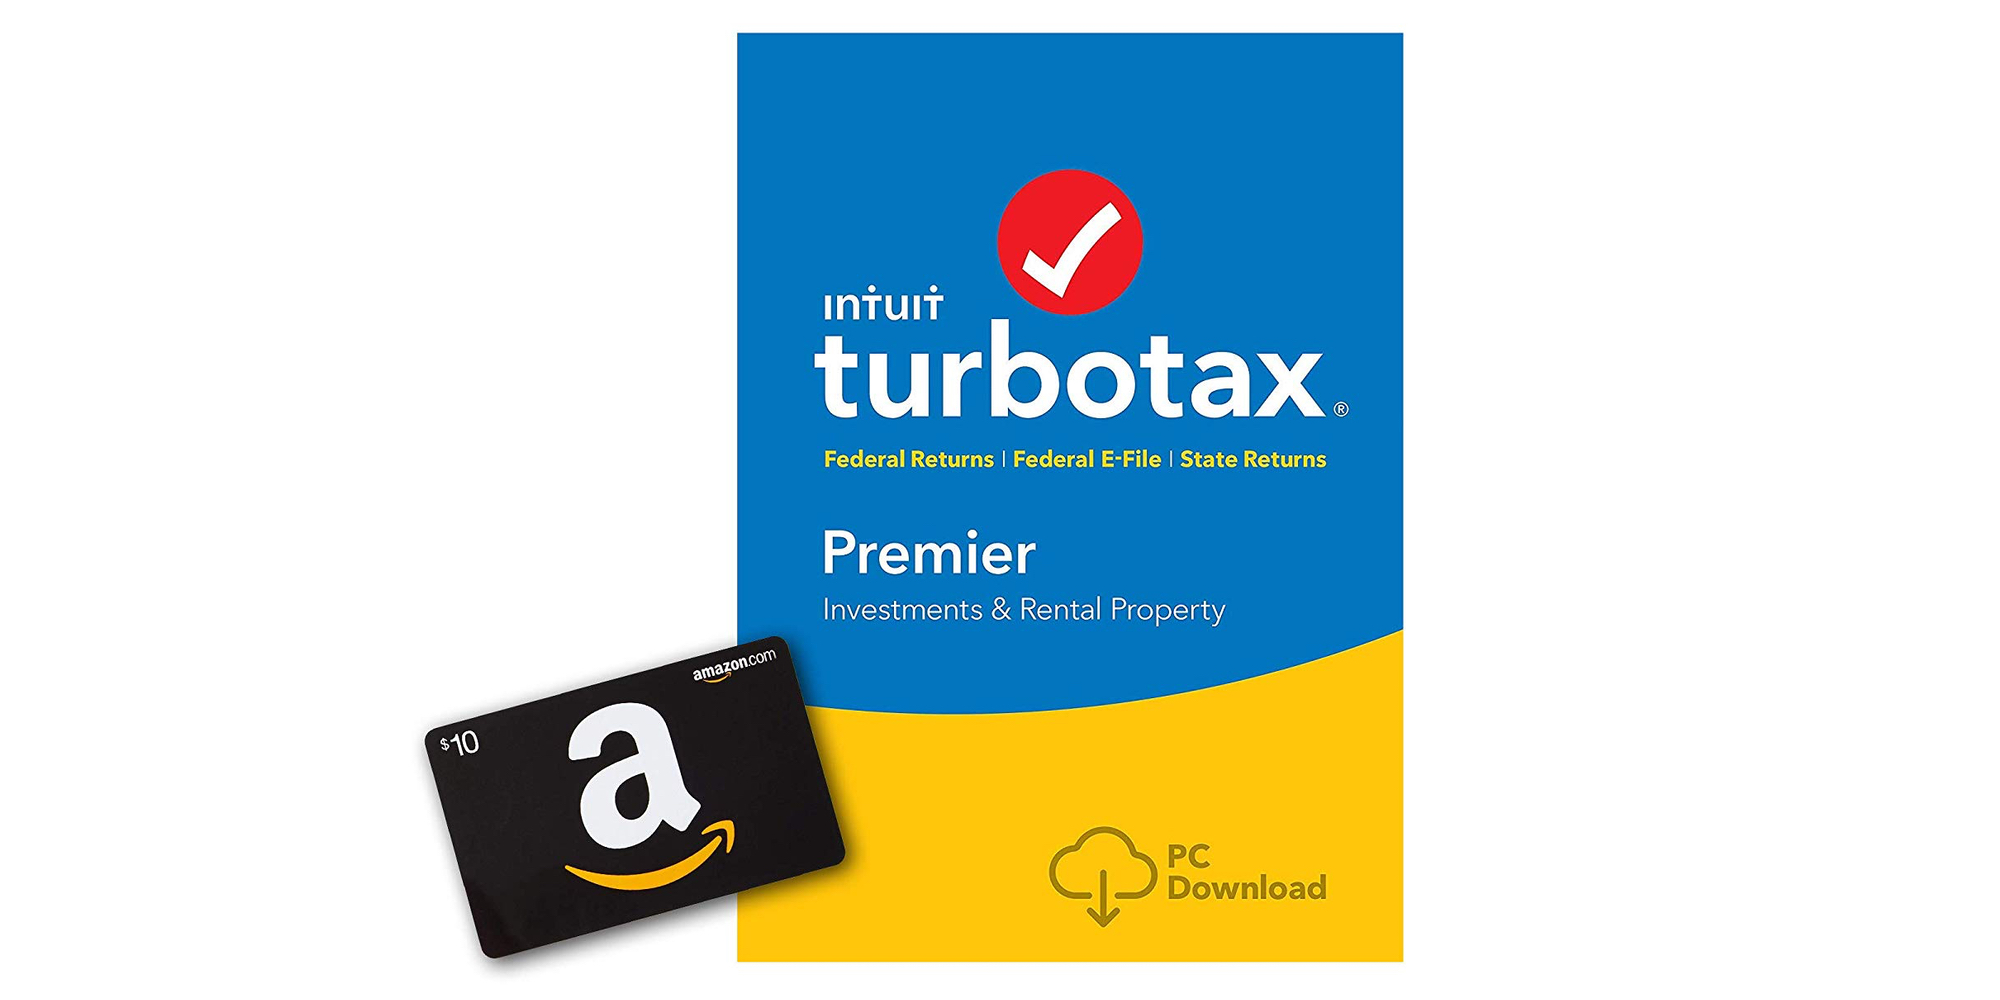 turbotax discount code discover card